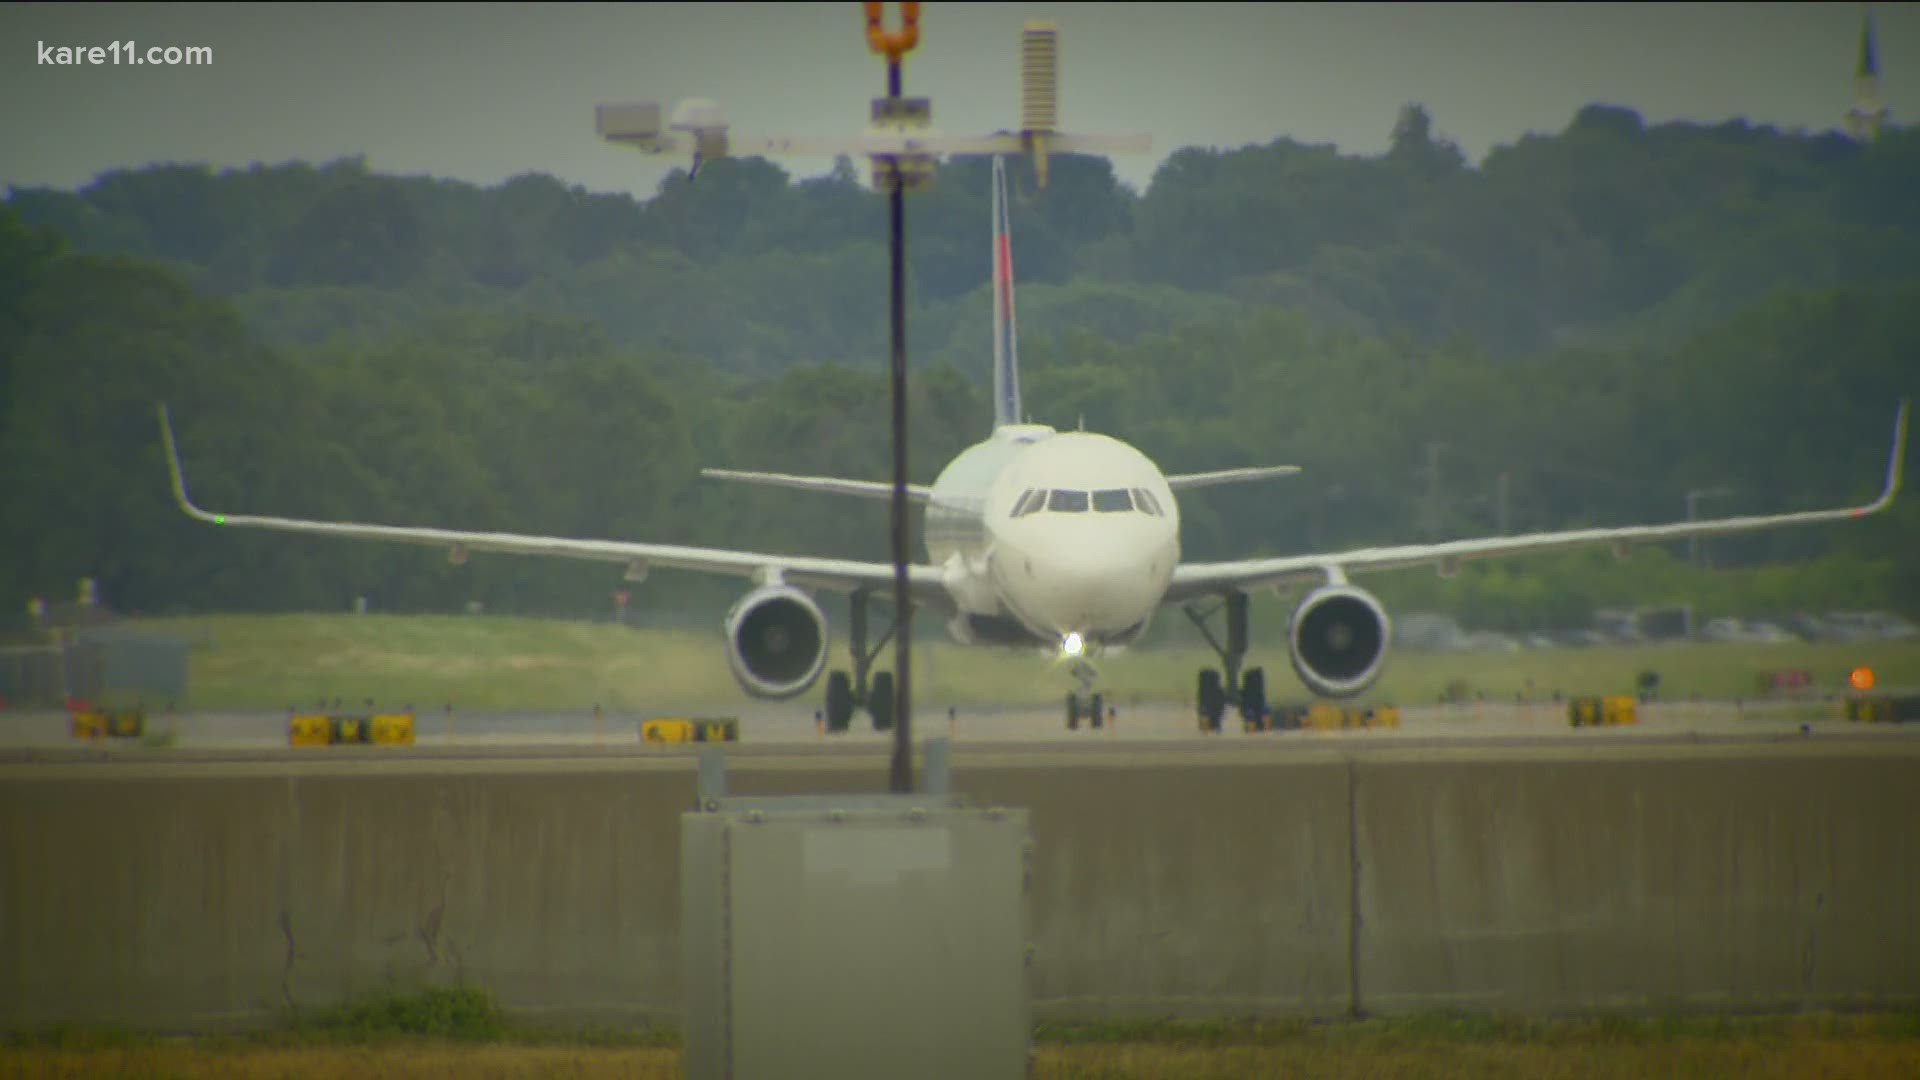 The FAA says airlines have reported about 3,000 cases of disruptive passengers this year.